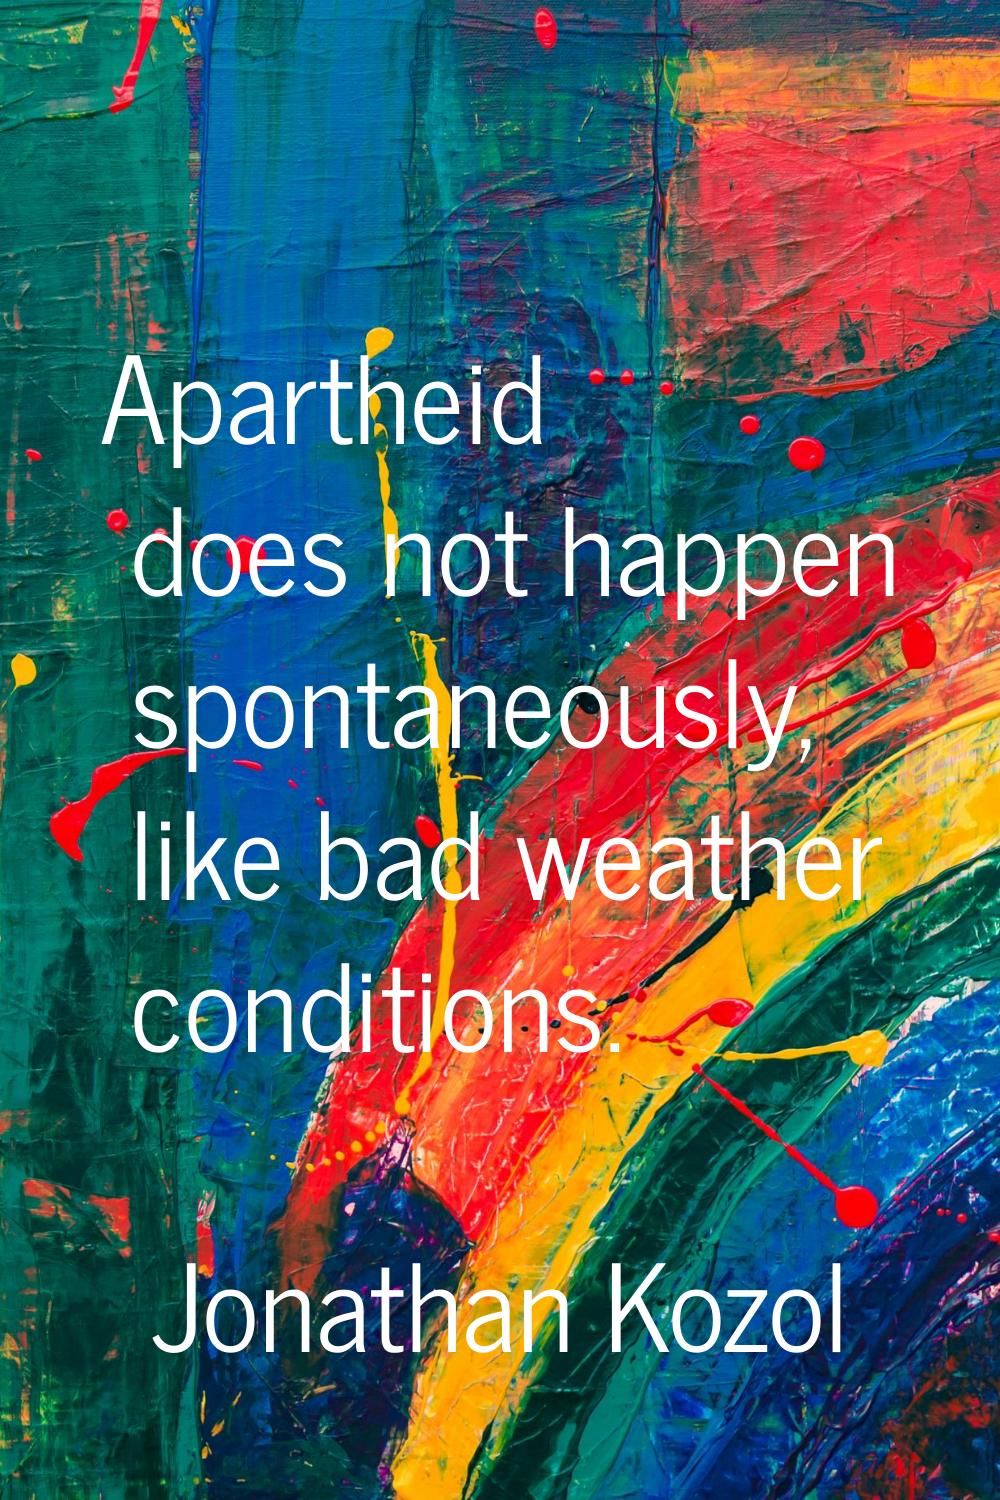 Apartheid does not happen spontaneously, like bad weather conditions.